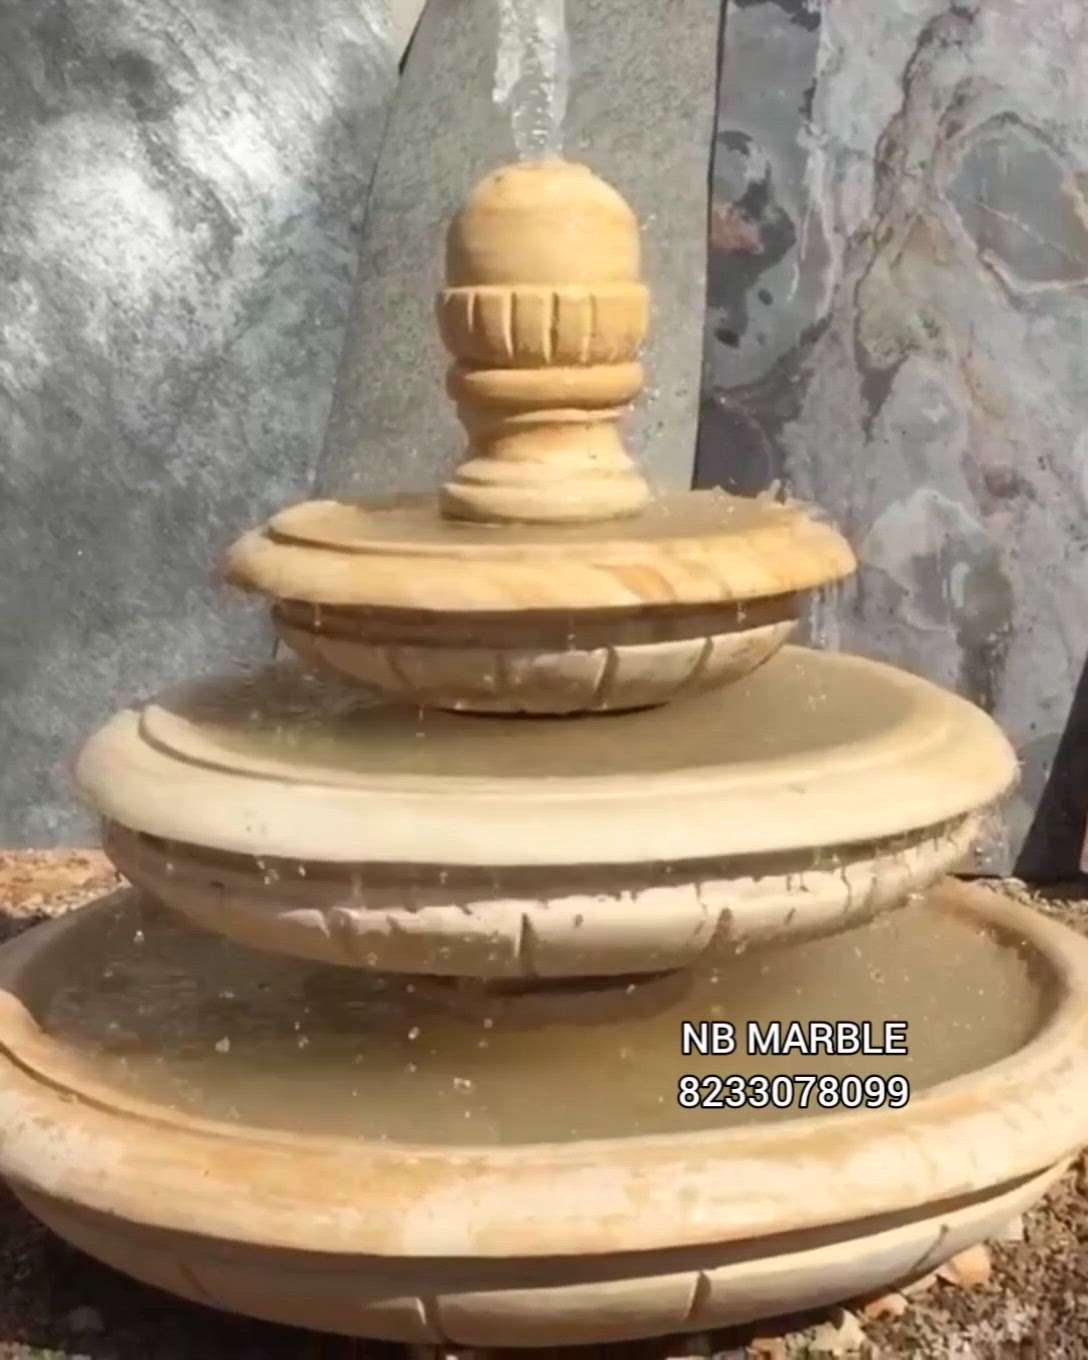 Sandstone Small Tier Fountain For Garden

Decor your garden and living room with beautiful fountain

We are manufacturer of marble and sandstone fountain

We make any design according to your requirement and size

Follow me @nbmarble

More information contact me
8233078099
.
.
.
.
.
.
.
.
.
.
.
.
#sandstonefountain #stonefountain #nbmarble #fountain #waterfountain #waterfall #marblefountain #gardendecor #landscape #instafashion #instadecor #homedecor #homedecoration